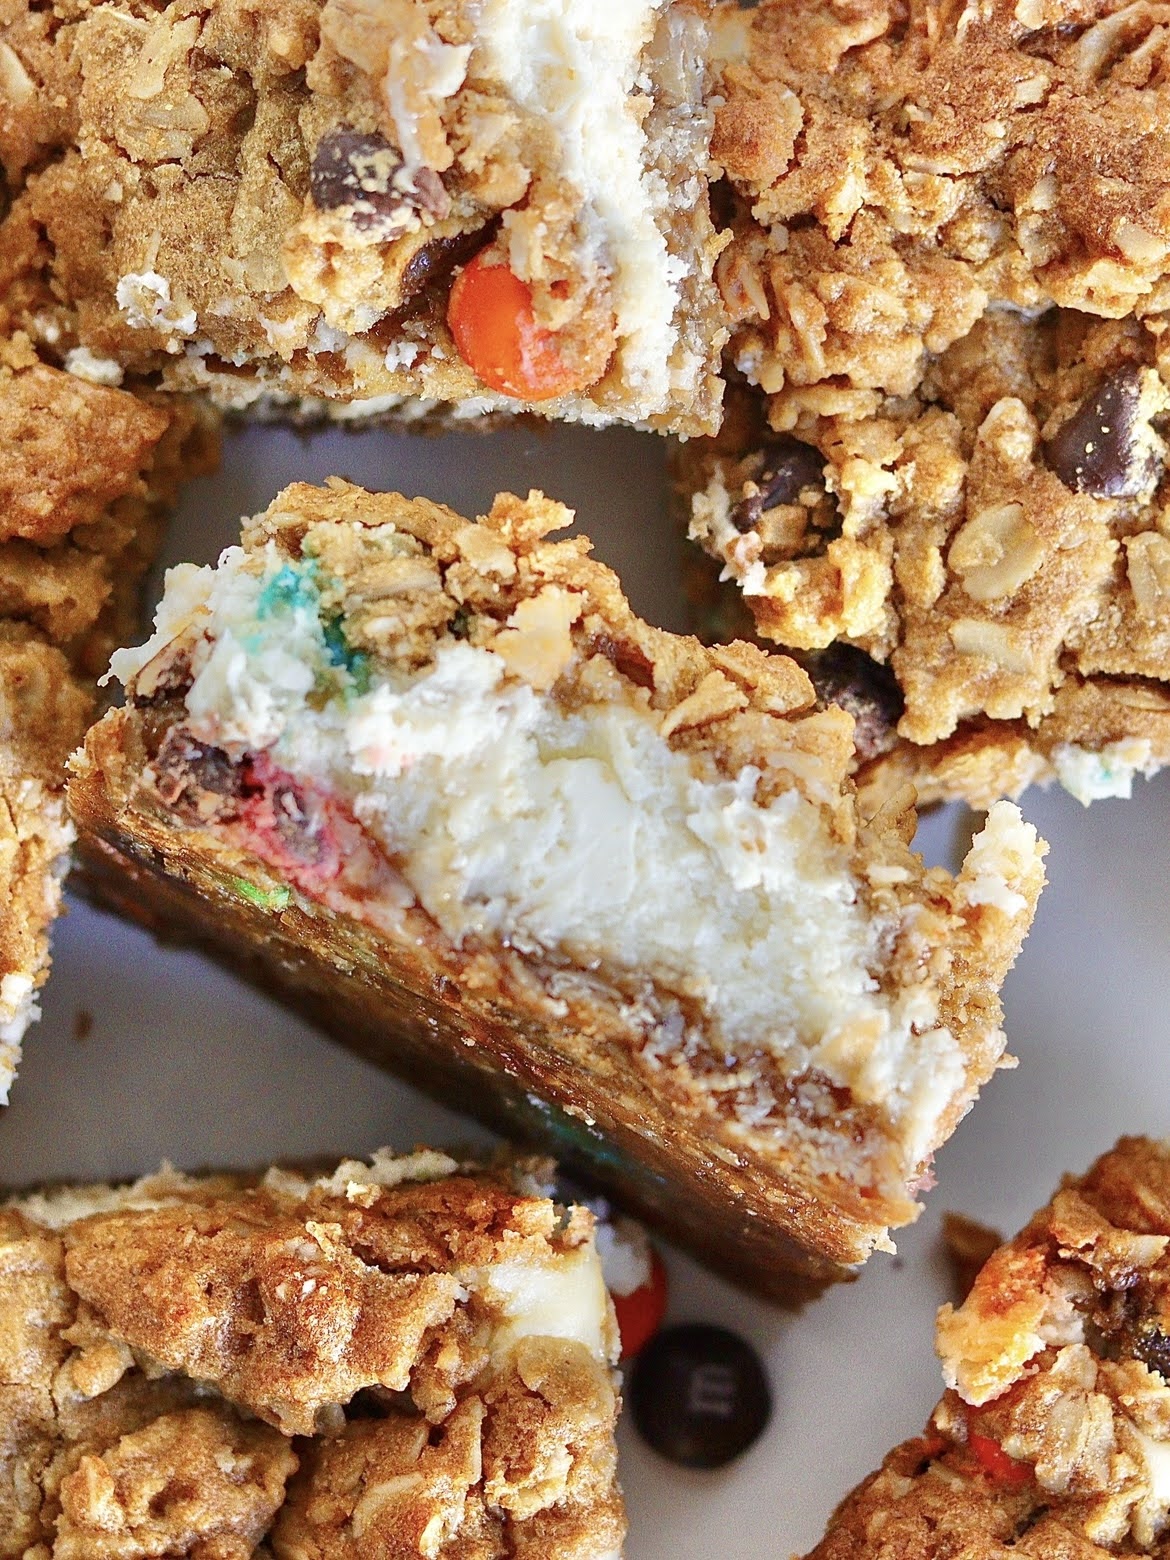 Overhead view of a monster cookie cheesecake bar on its side, showcasing the crust, cheesecake and cookie layer